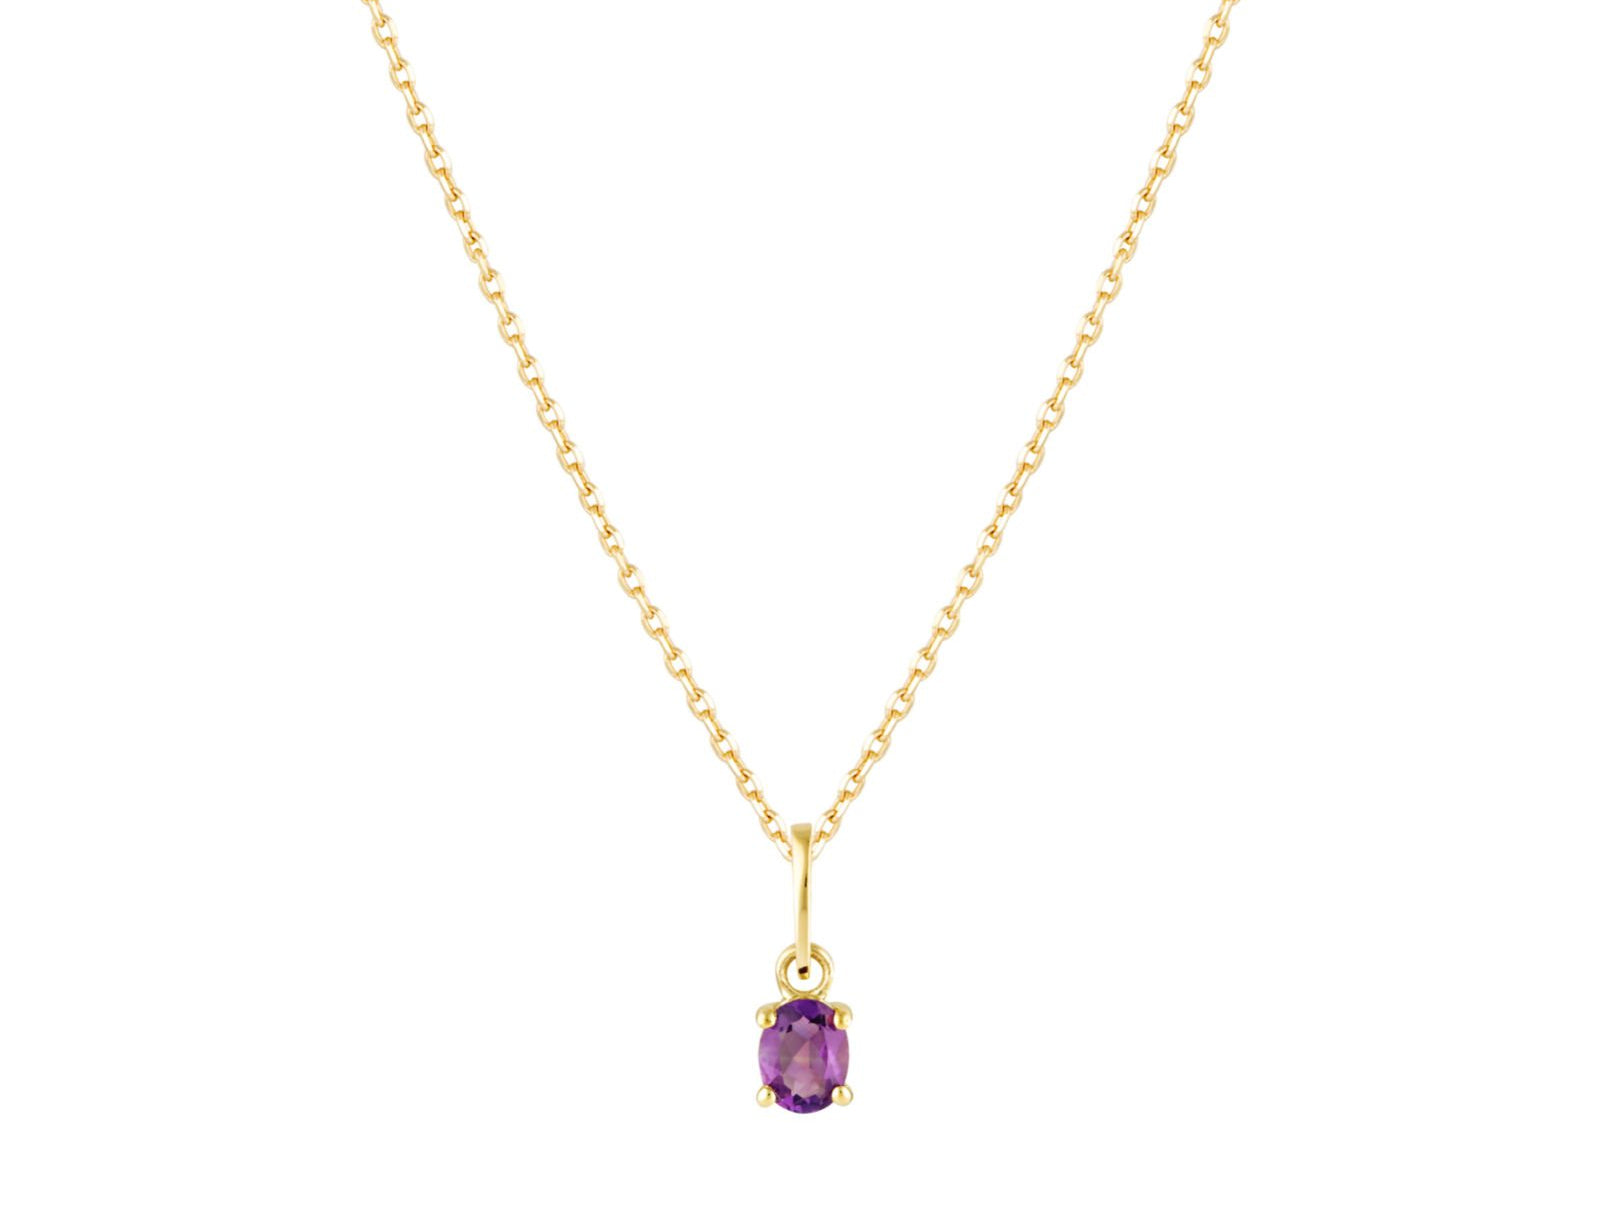 Picture of Luna Rae Solid 9k Gold Amethyst Necklace